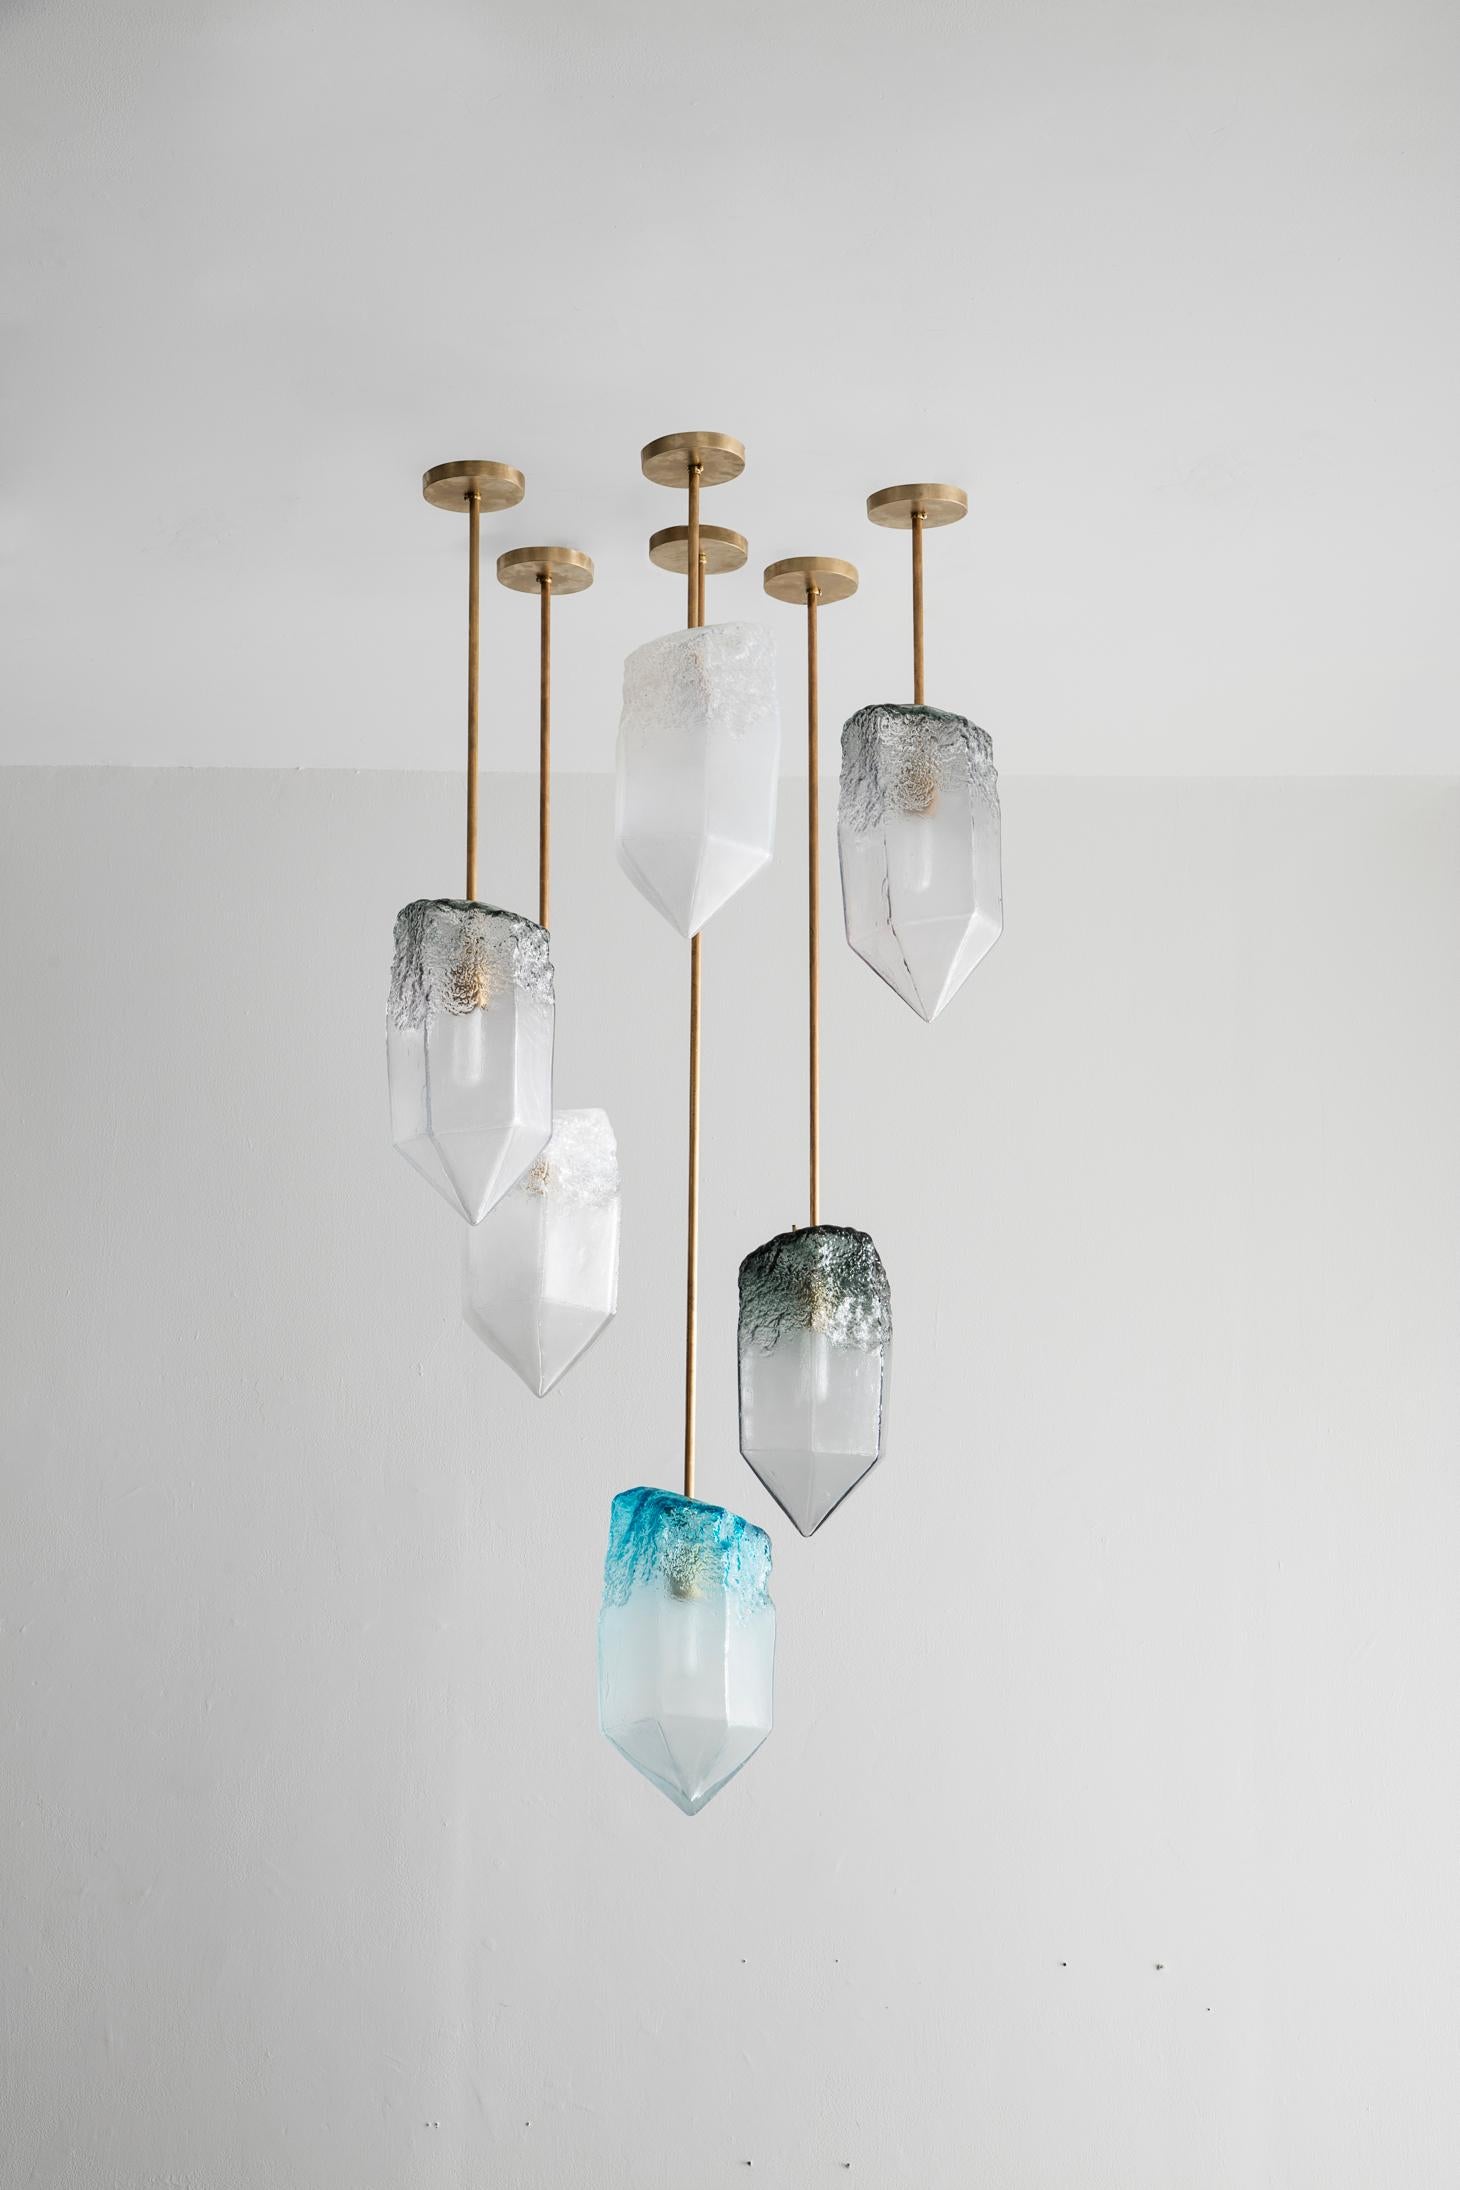 Crystal illuminated sculptural pendant in hand blown glass. Designed and made by Jeff Zimmerman, USA.

Due to the handmade nature of this piece, color, size, and shape may very slighty.